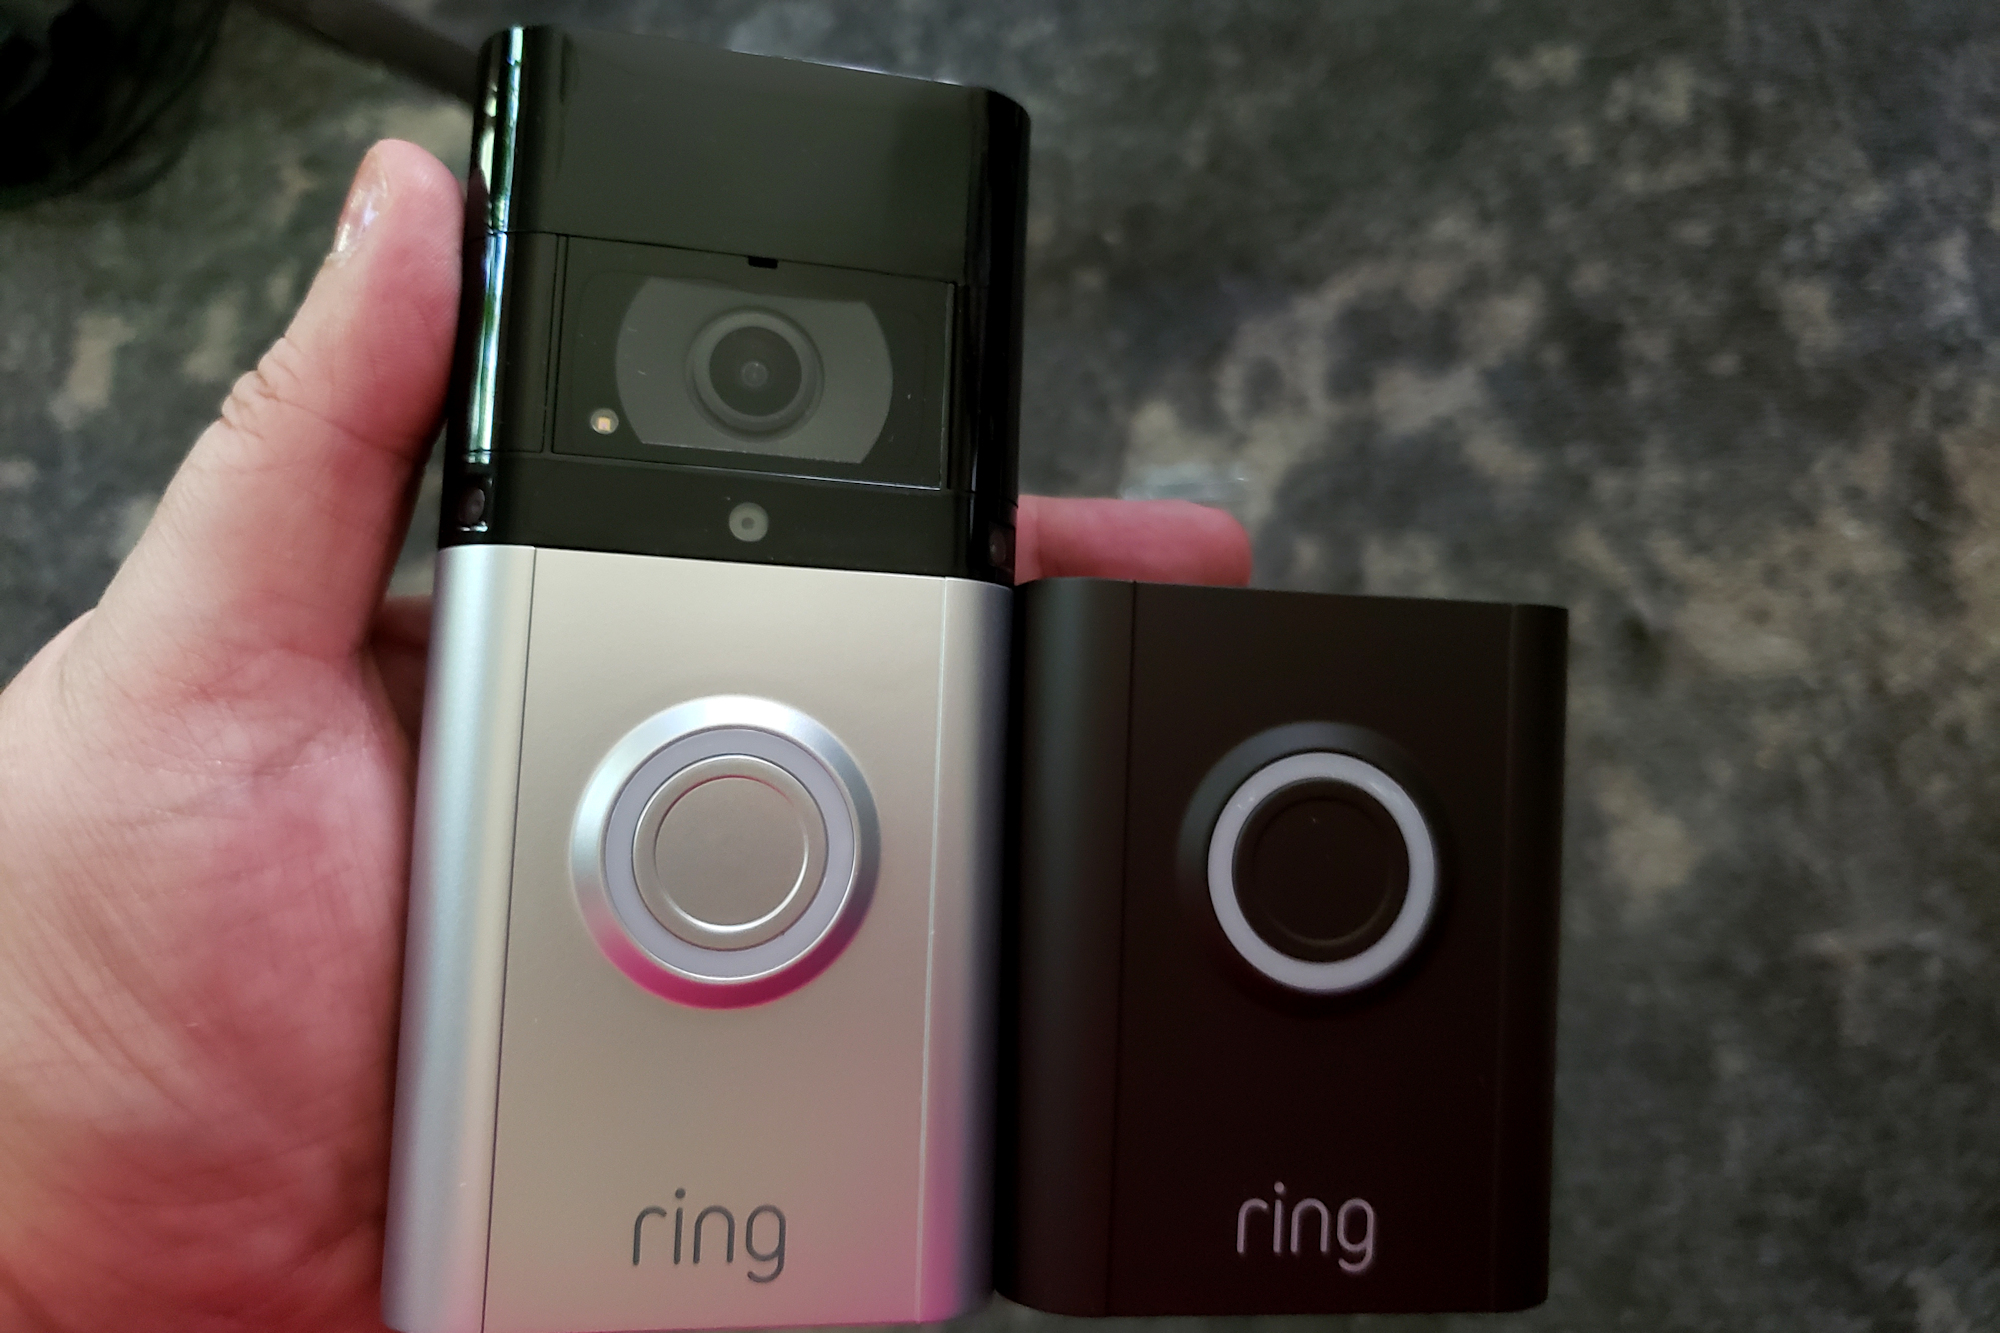 Ring's Video Doorbell 3 Plus Product Review